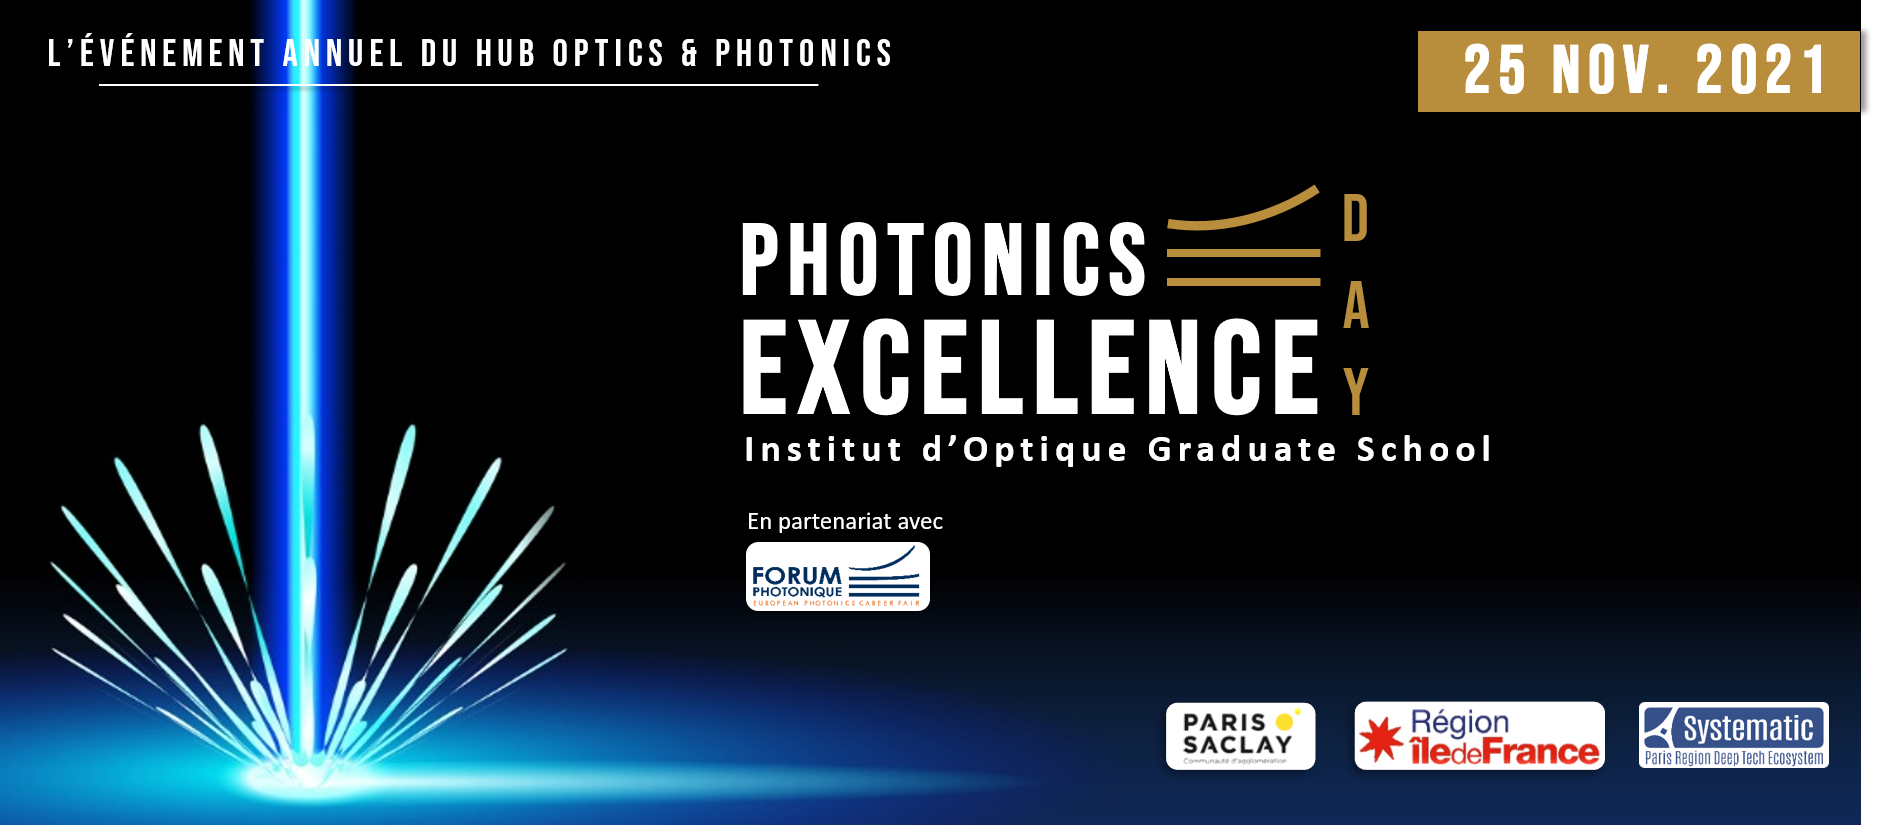 Photonics Excellence Day 2021